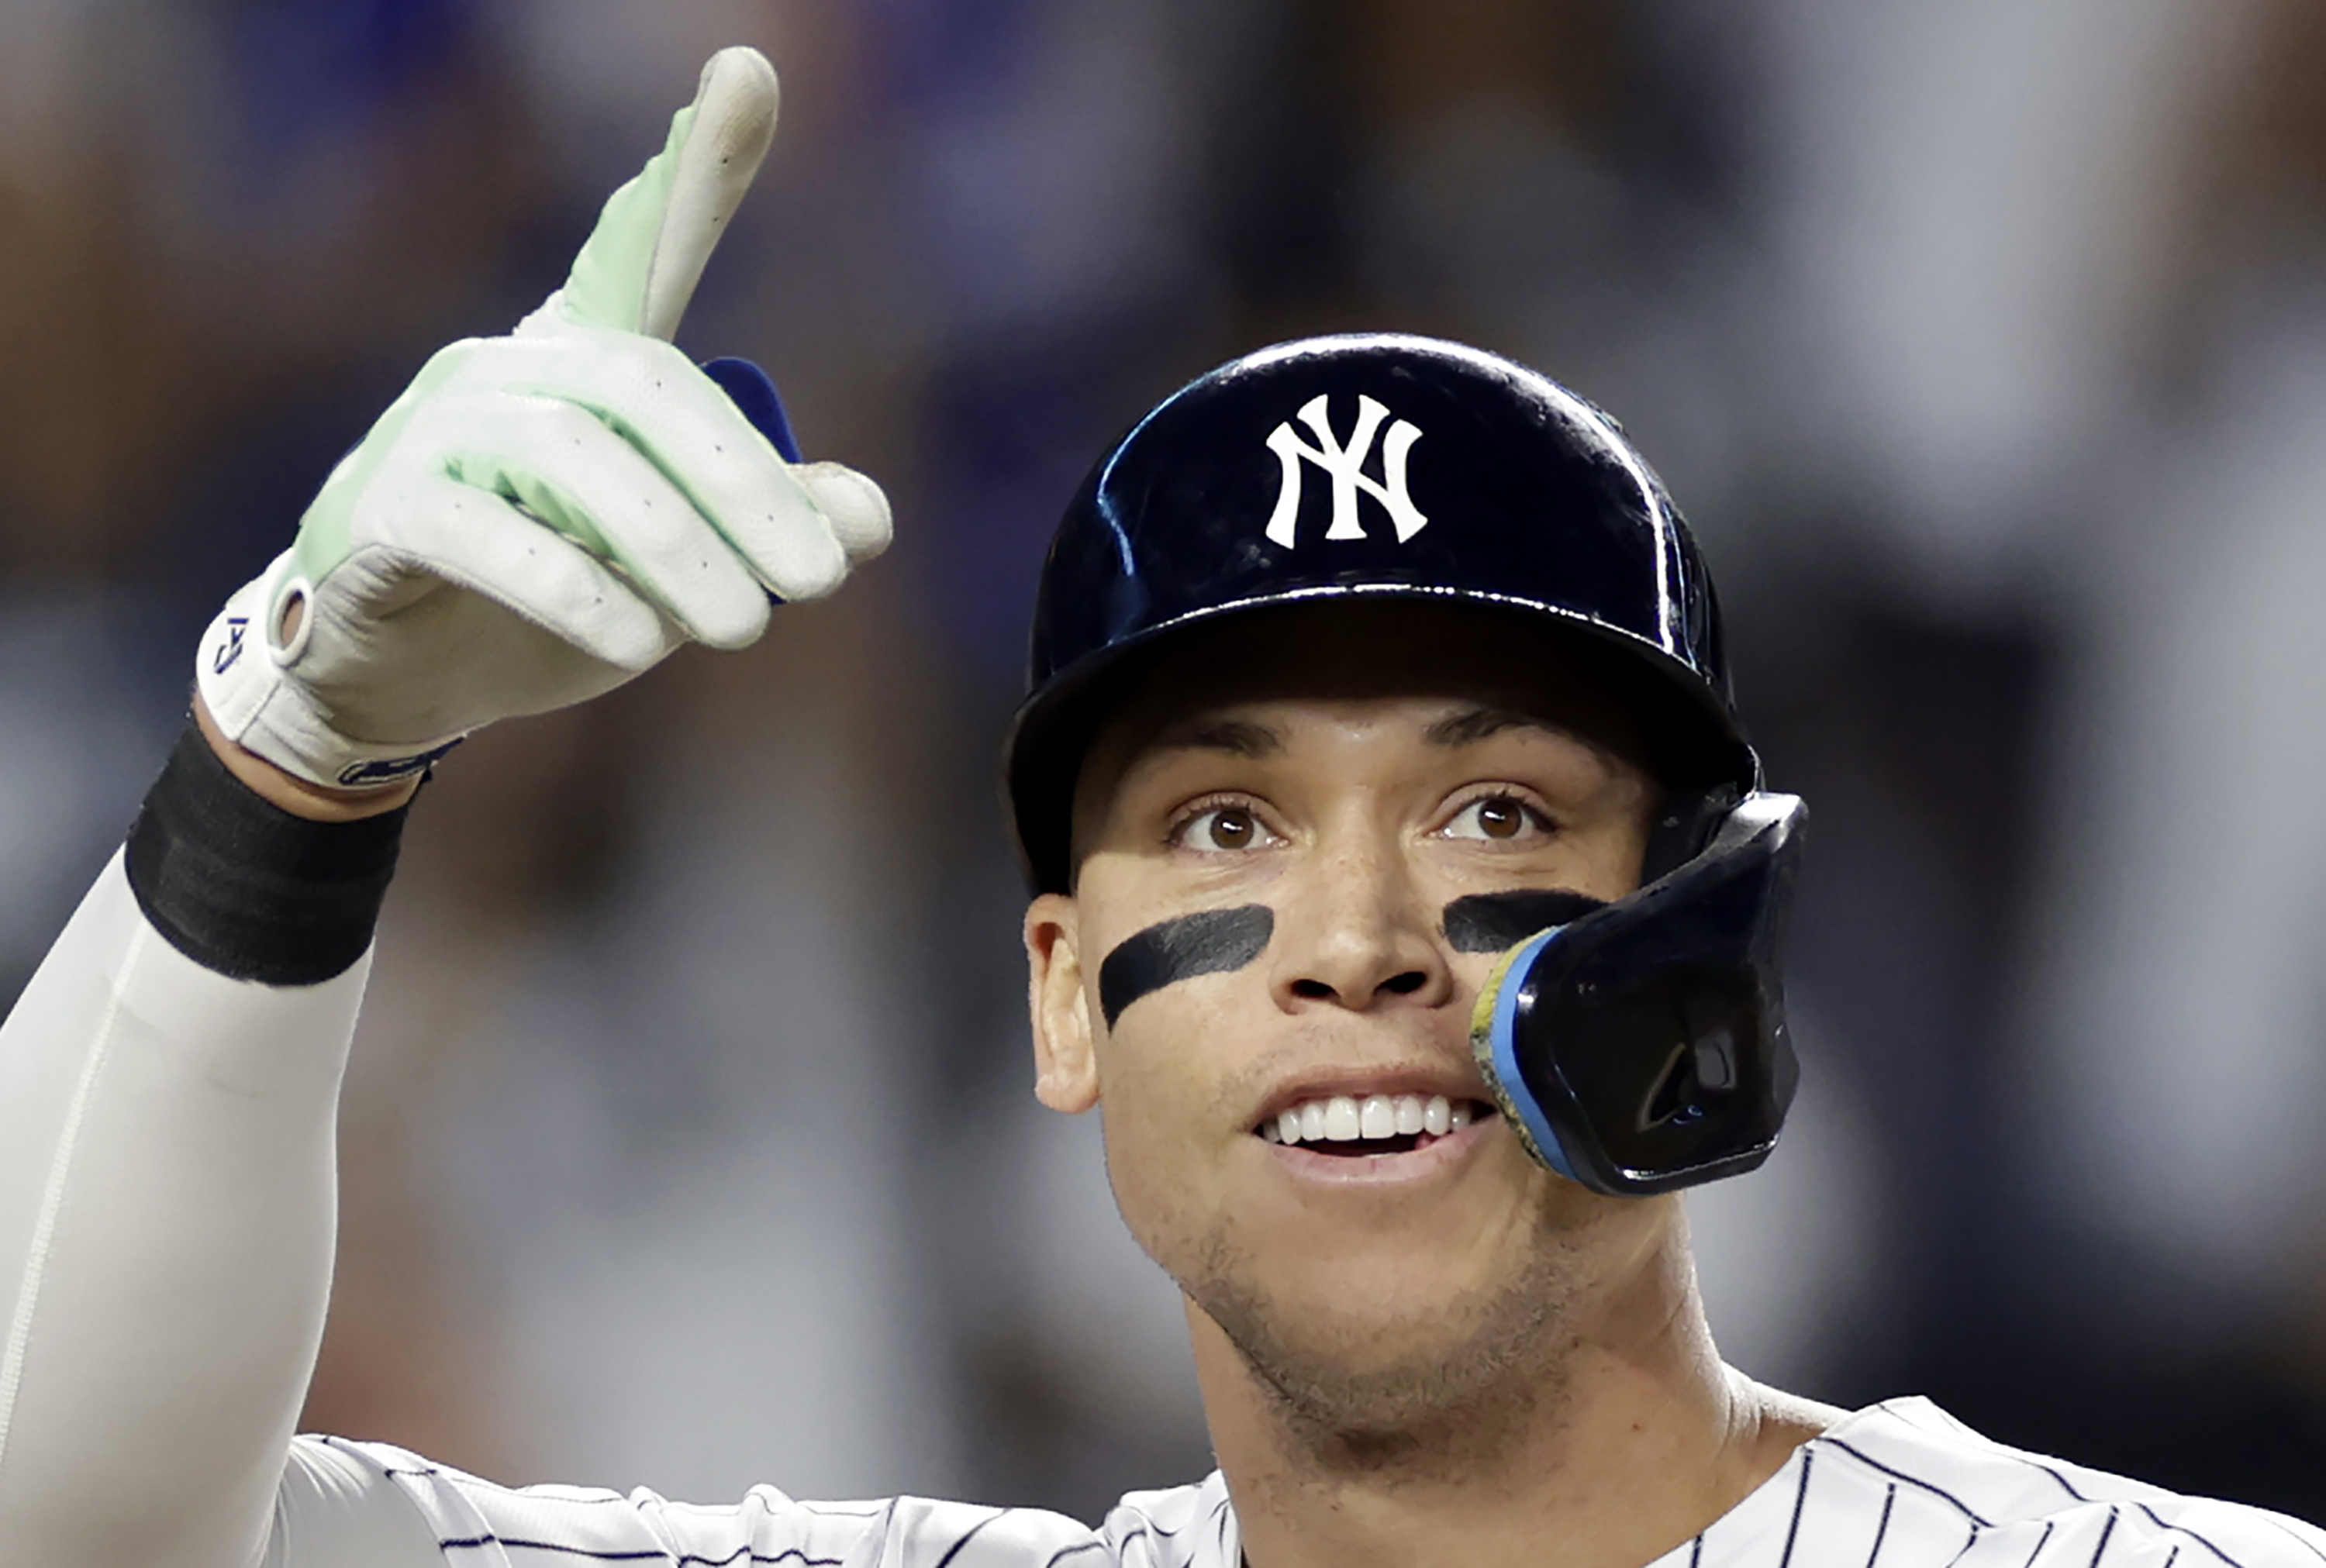 Aaron Judge introduced himself to Red Sox fans with a homer and a